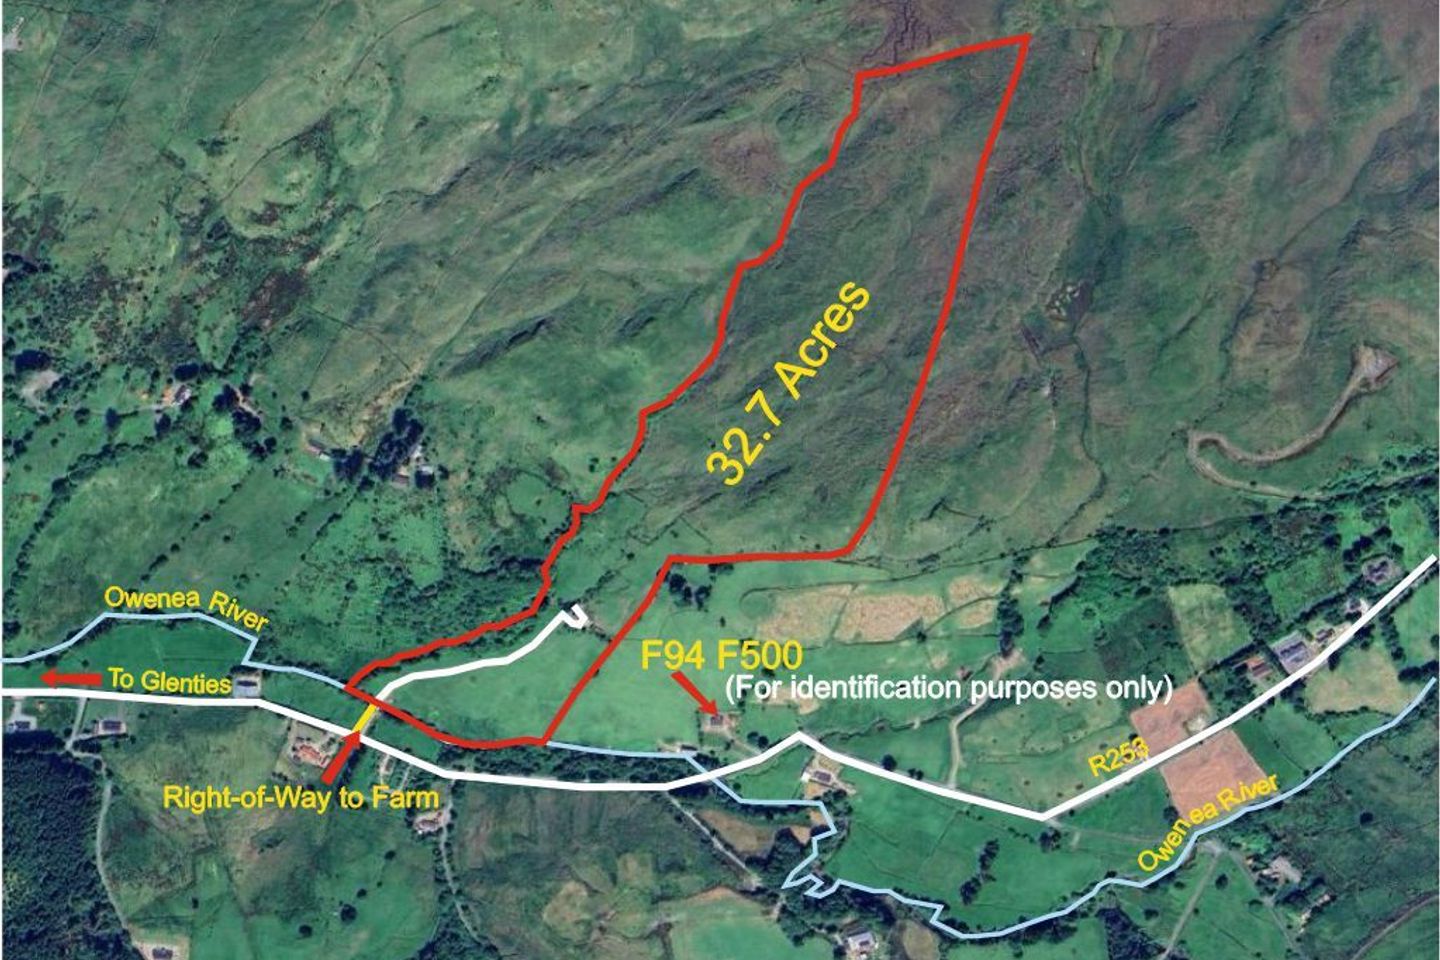 32.7 Acres at Edeninfagh, Glenties, Glenties, Co. Donegal